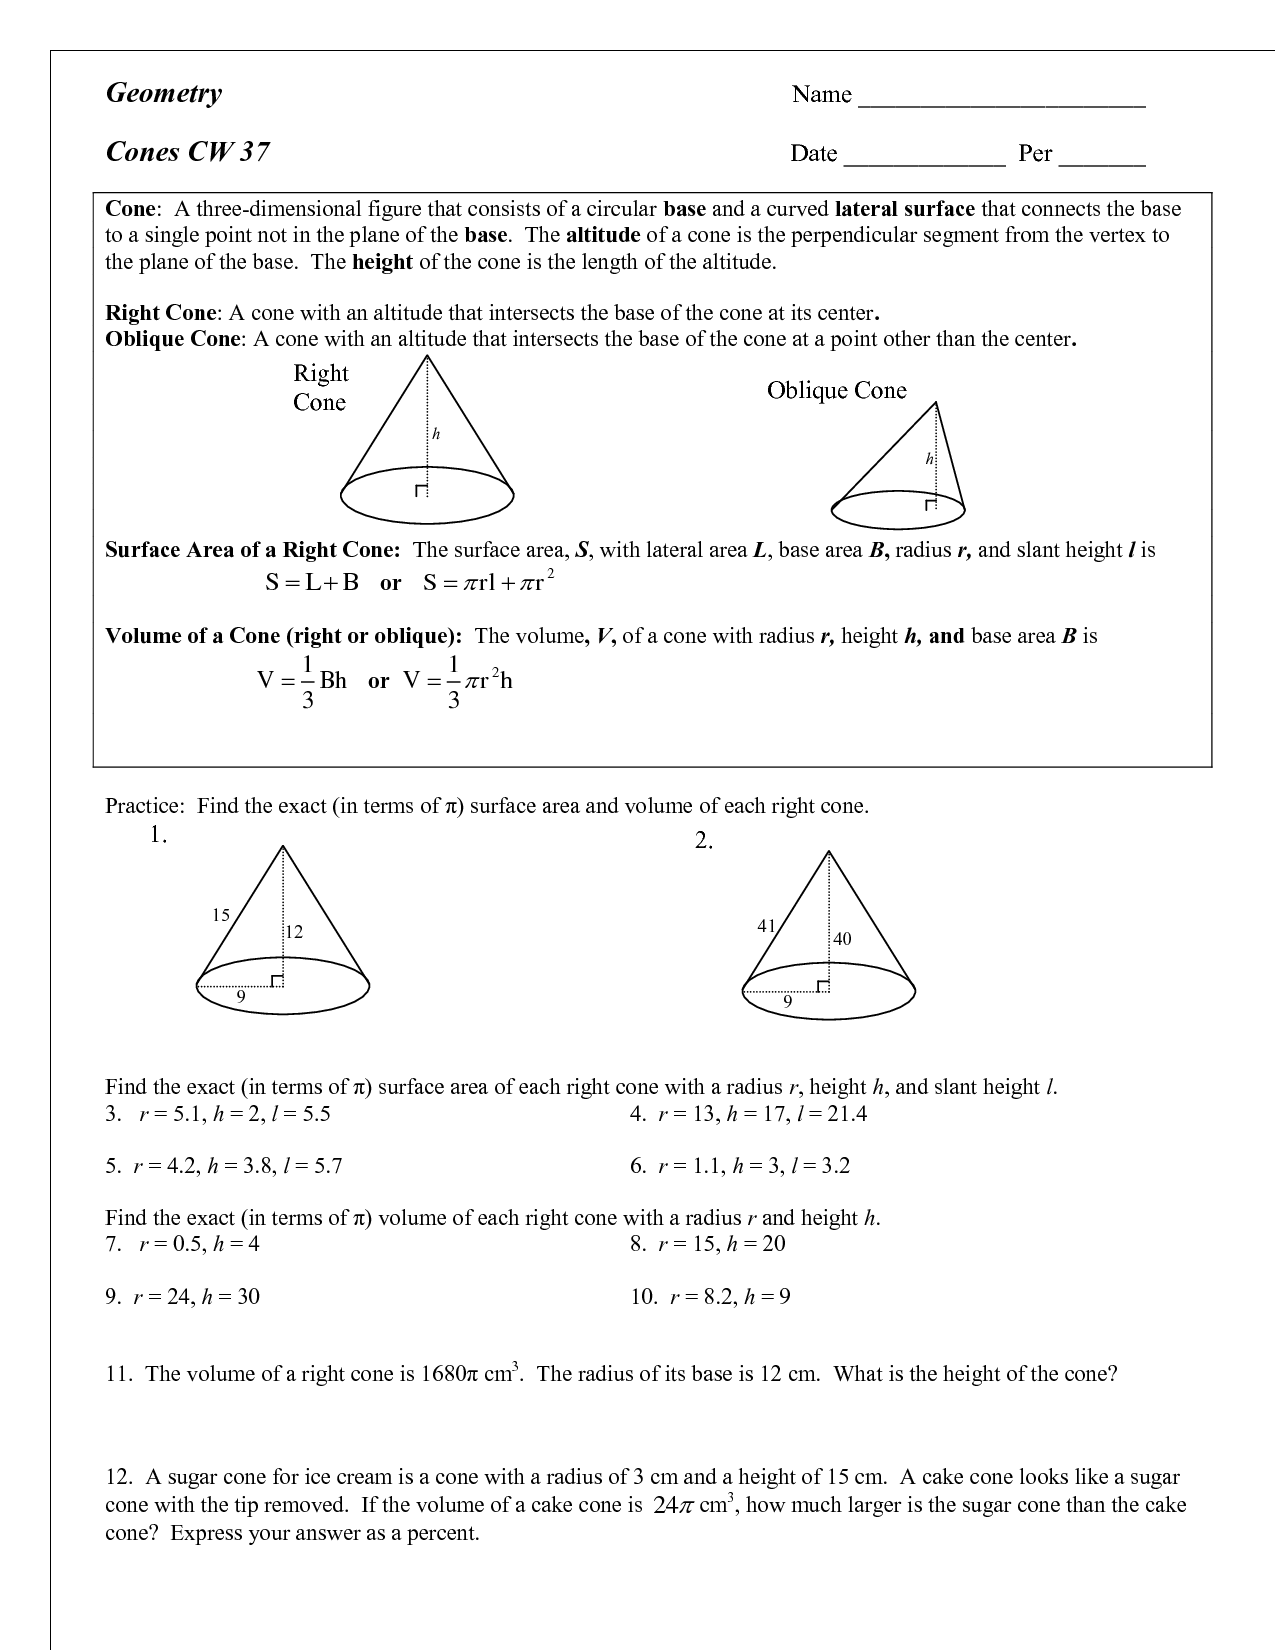 Surface Area and Volume of Cones Worksheets Image